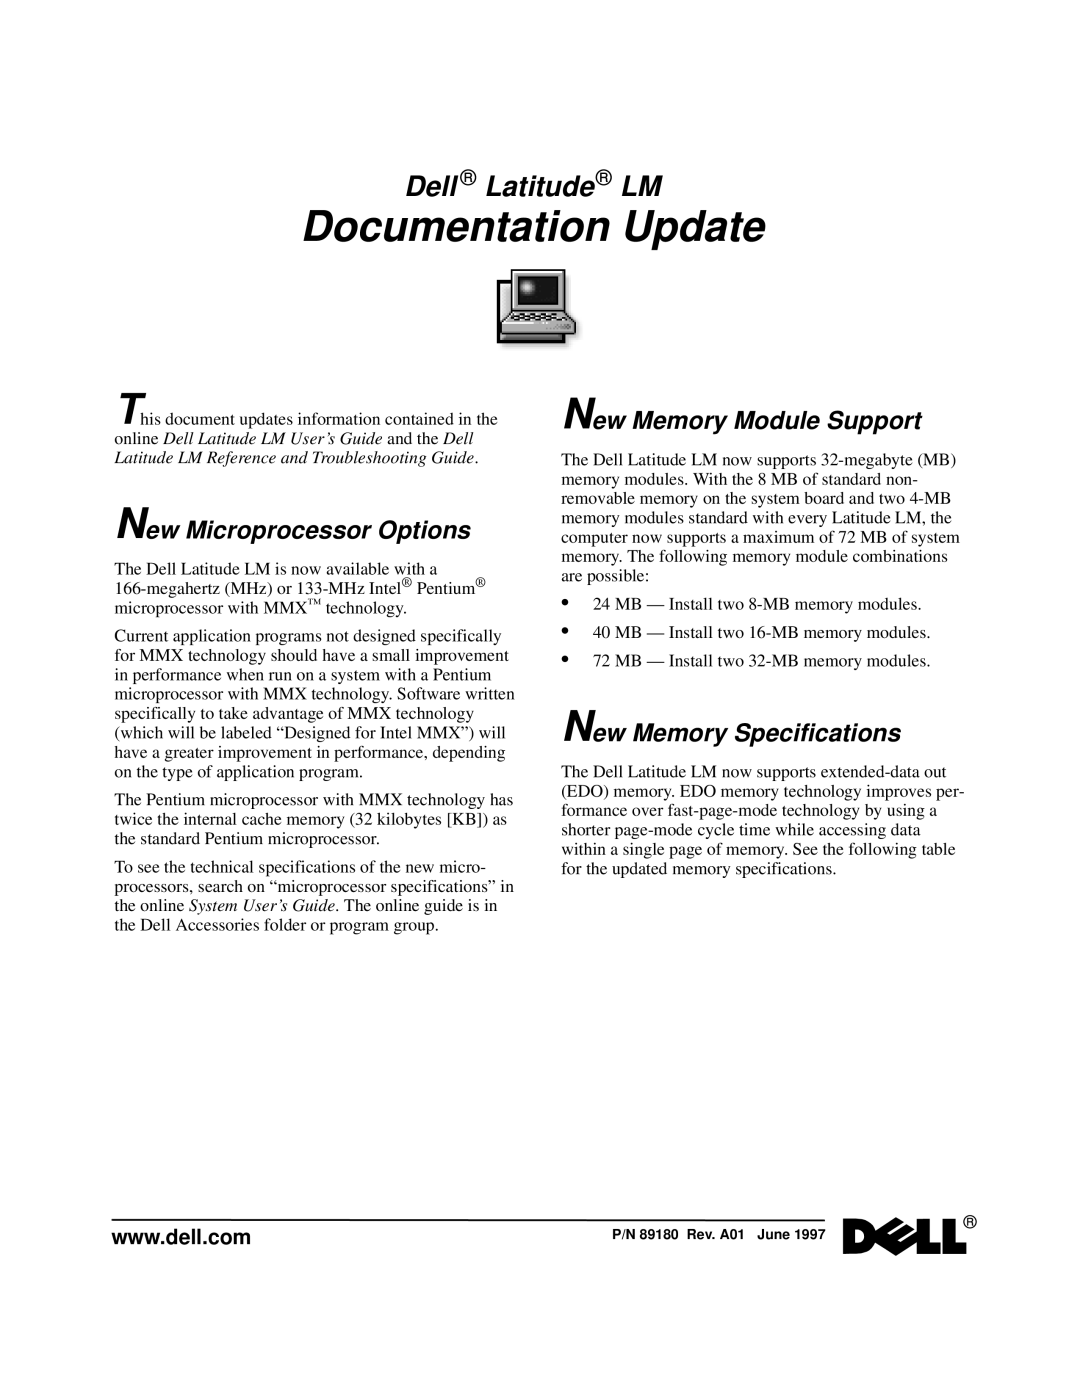 Dell LM specifications New Microprocessor Options, New Memory Specifications, New Memory Module Support 